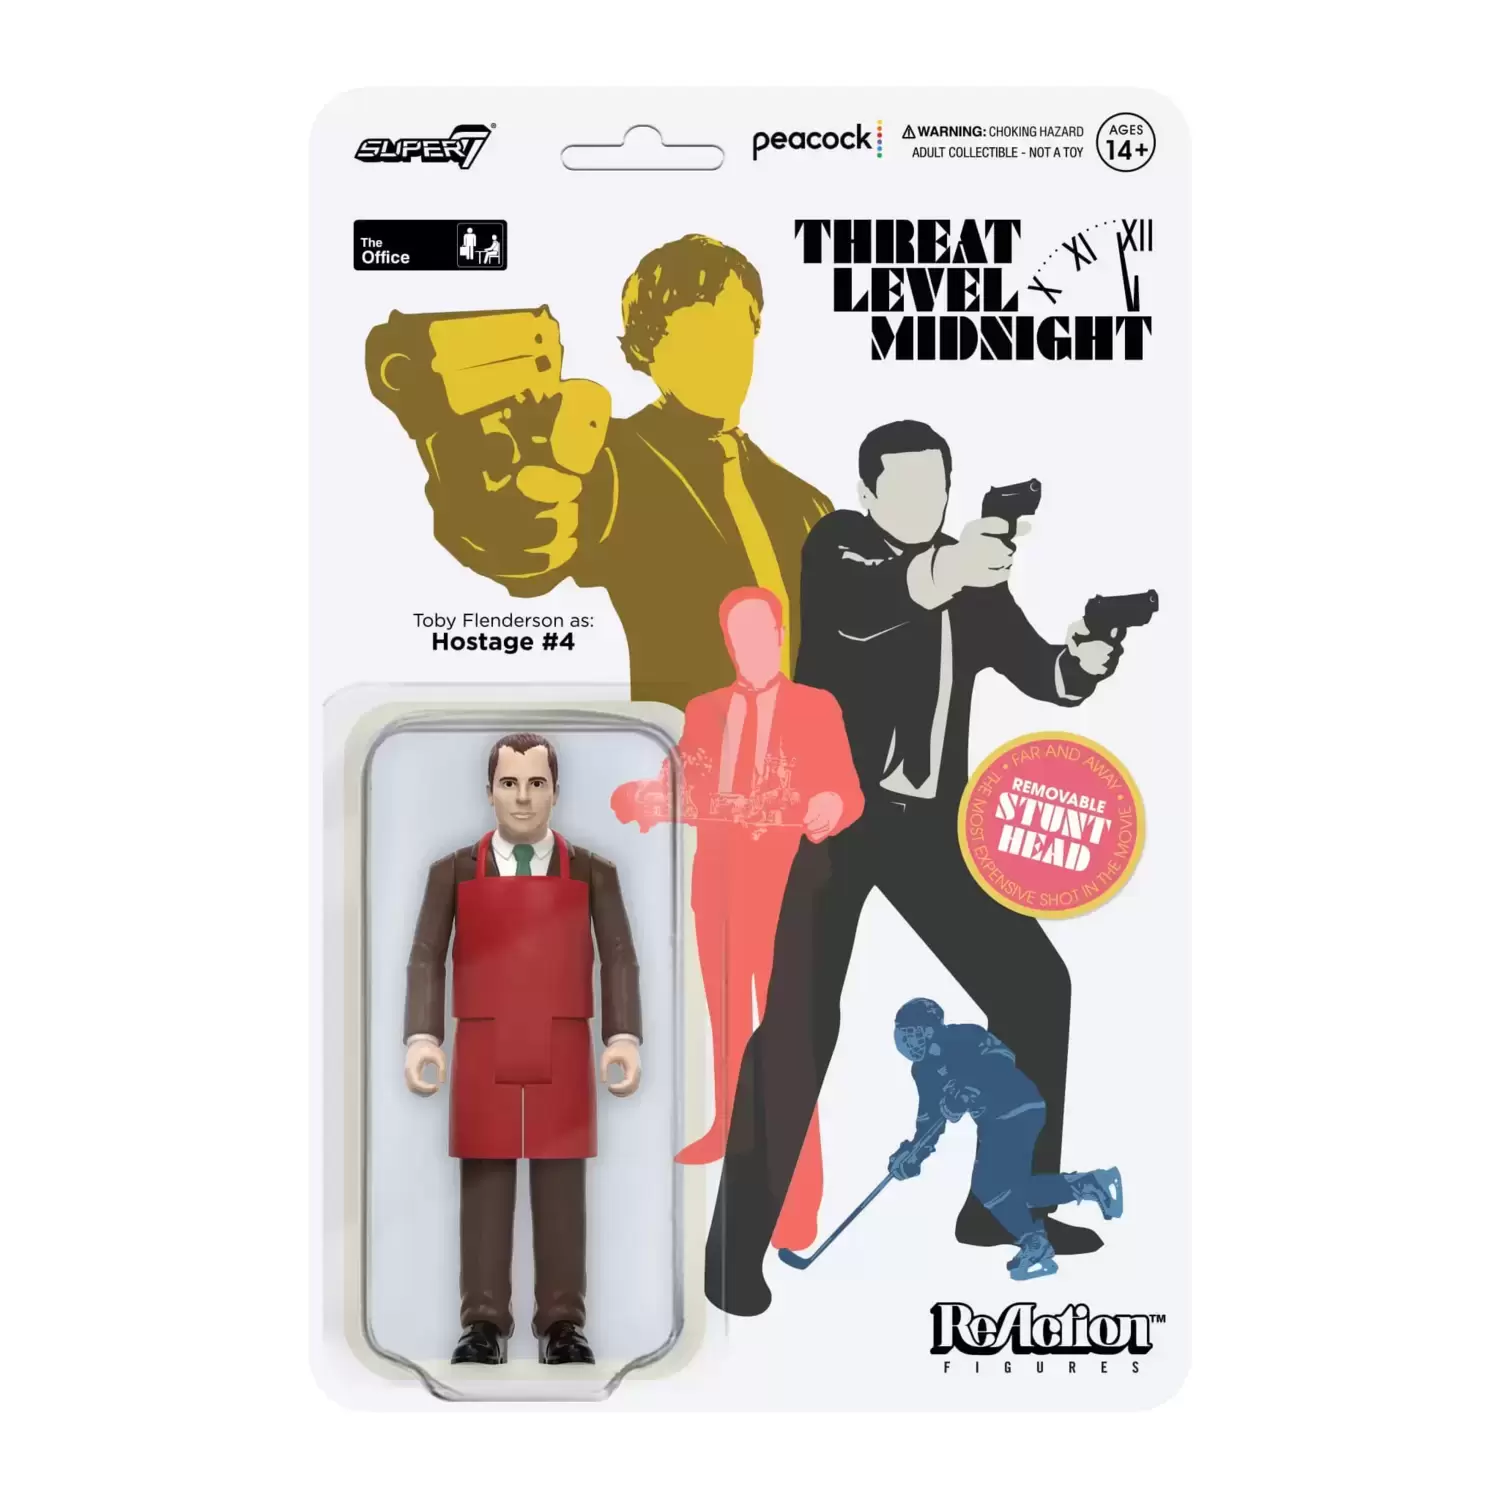 ReAction Figures - Threat Level Midnight - Toby Flenderson as Hostage #4